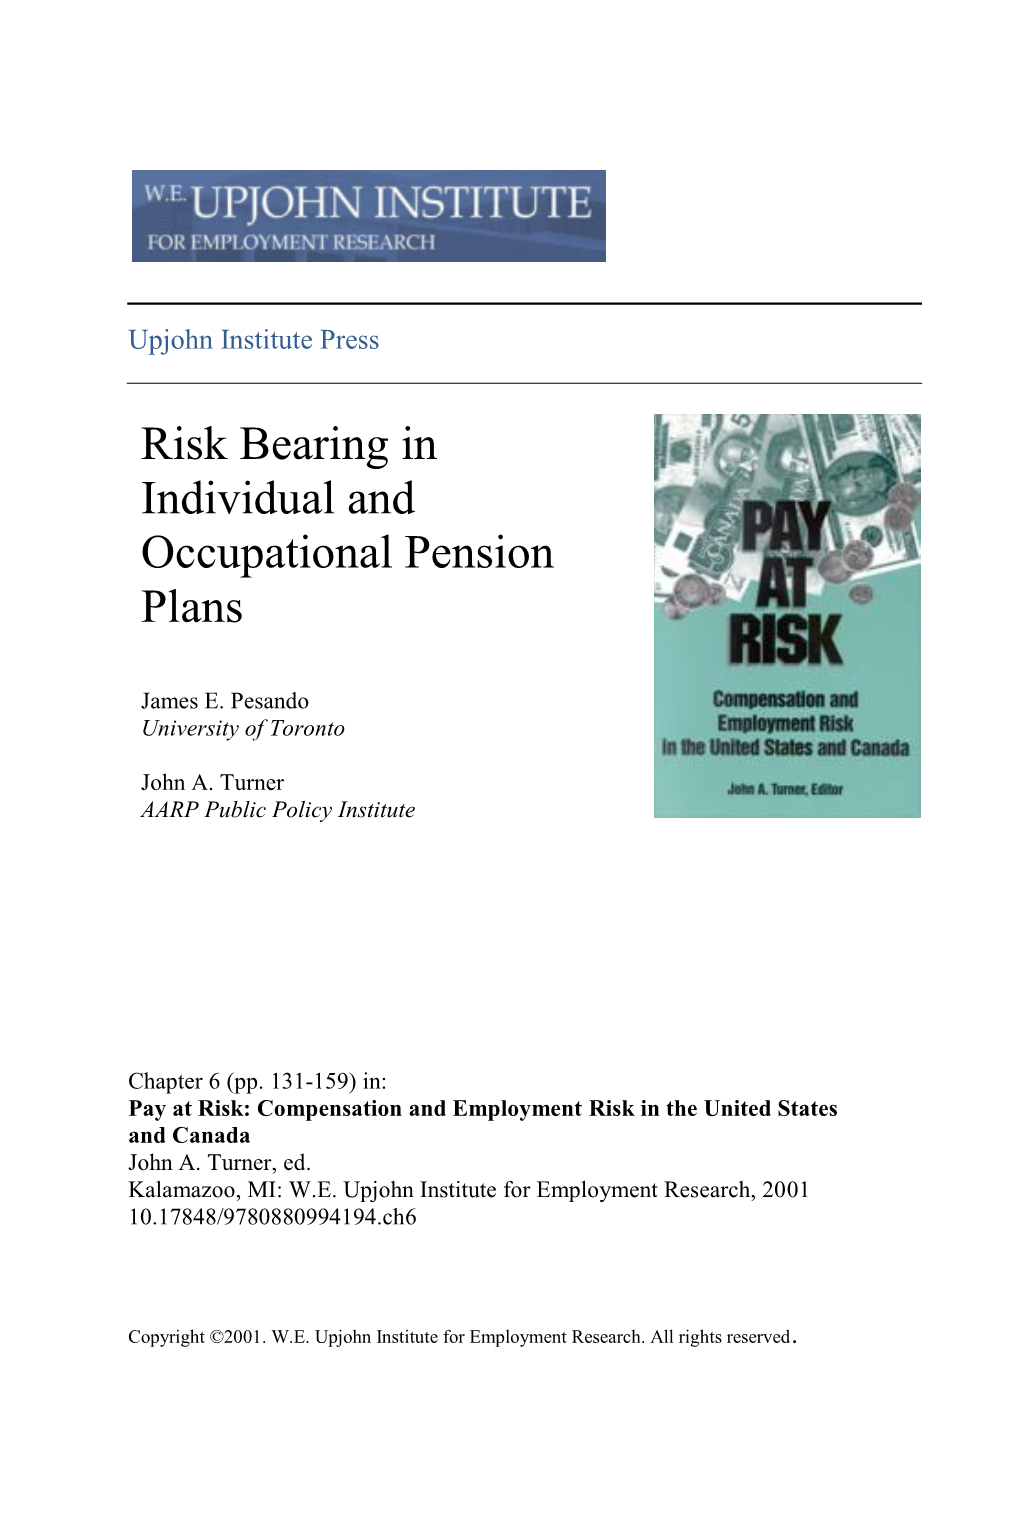 Risk Bearing in Individual and Occupational Pension Plans